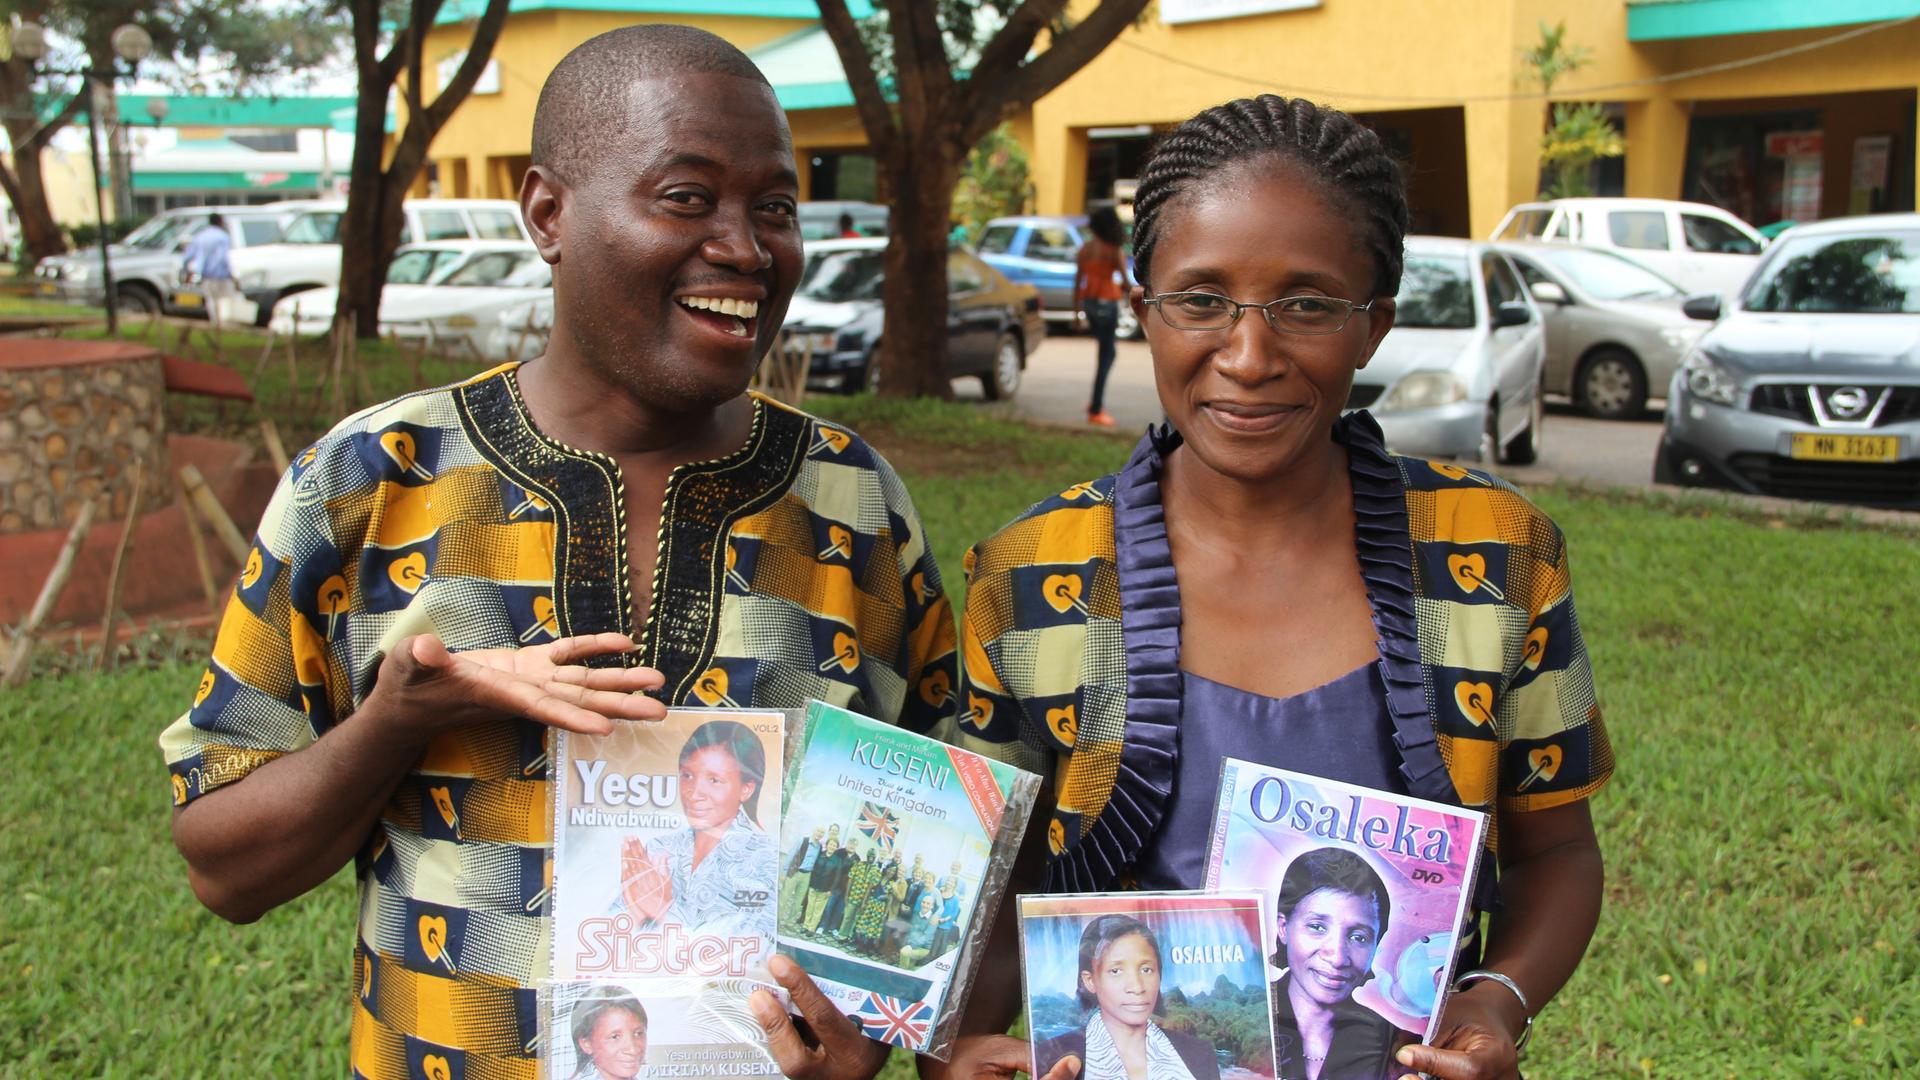 Frank and Miriam Kuseni are gospel artists based in Lilongwe, Malawi. They were forced to stop selling their CDs on the street.